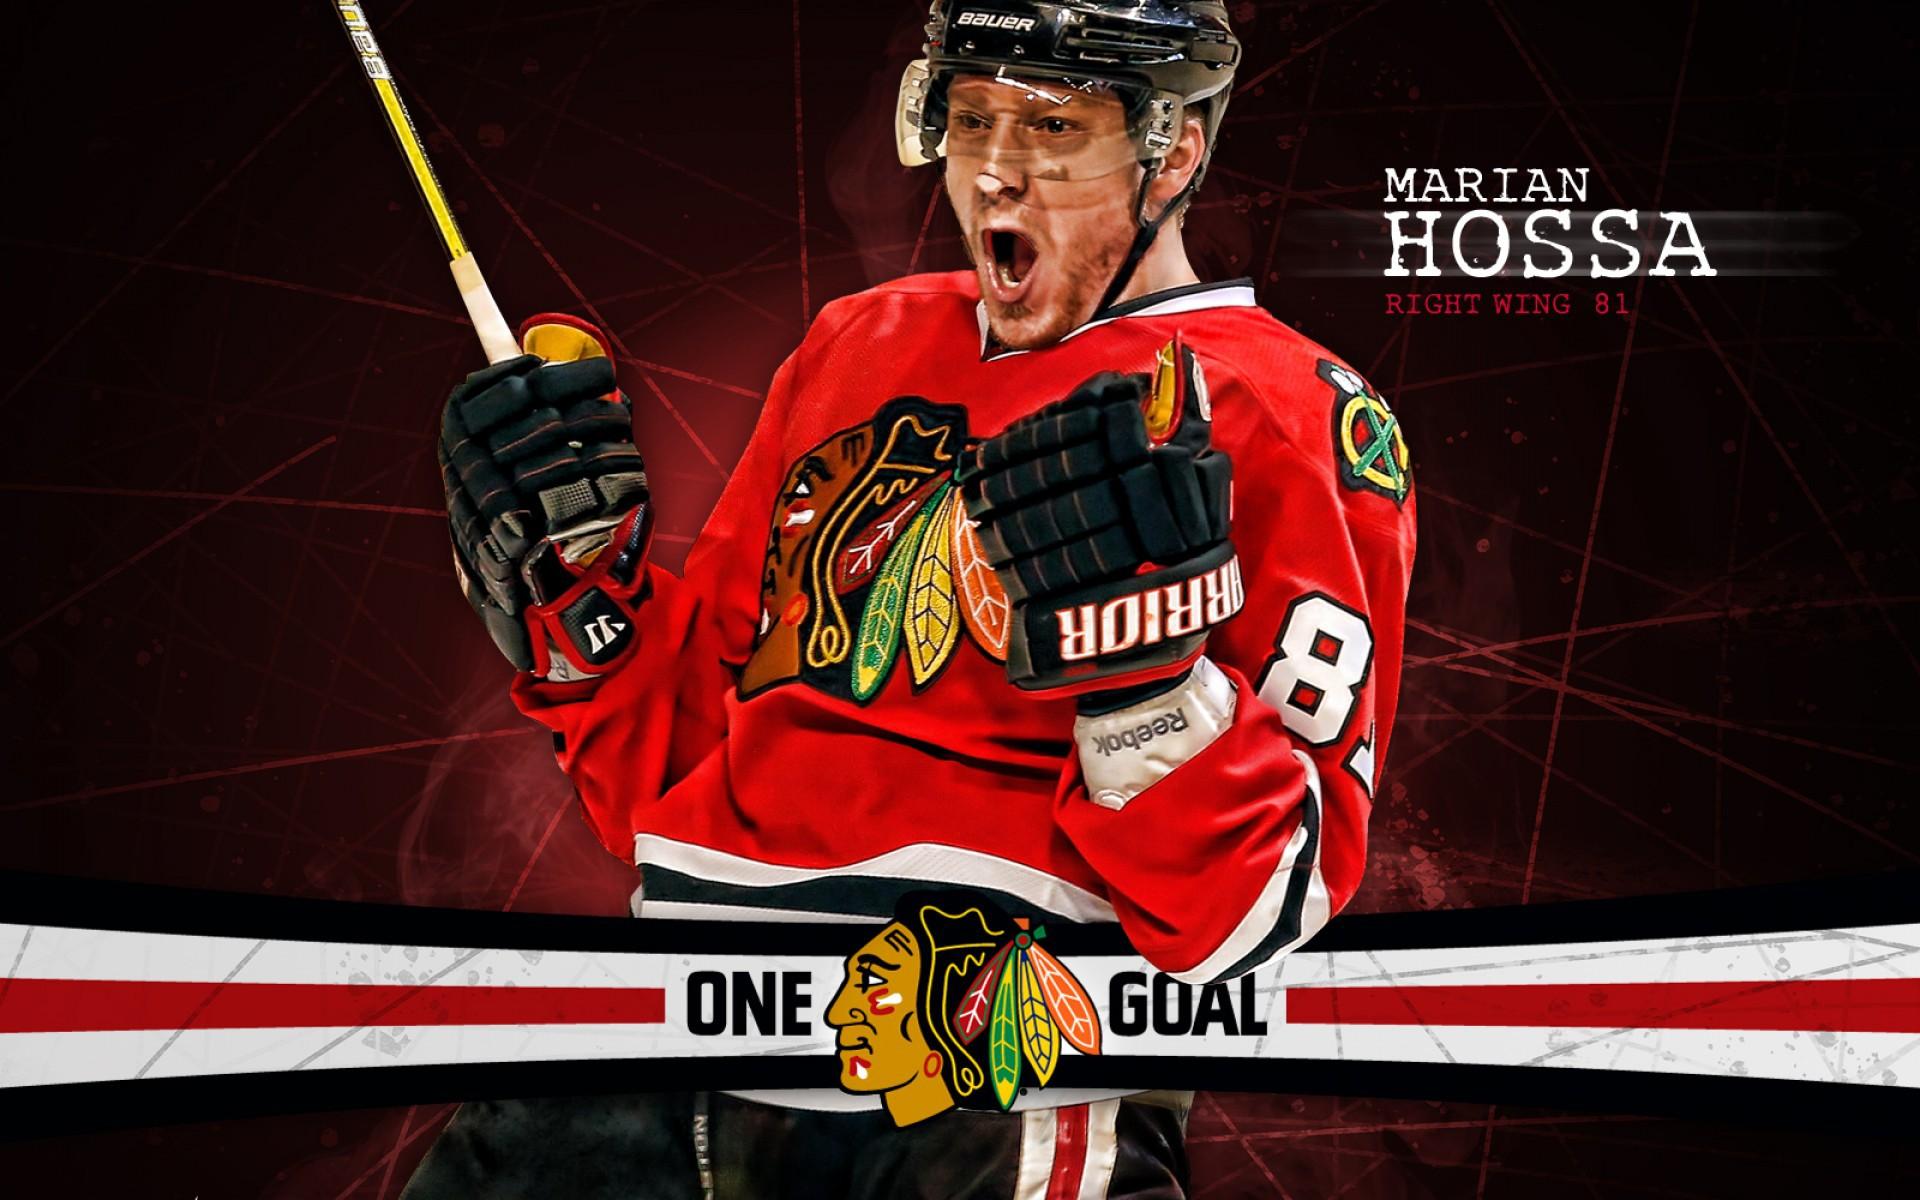 Player Marian Hossa wallpaper and image, picture, photo